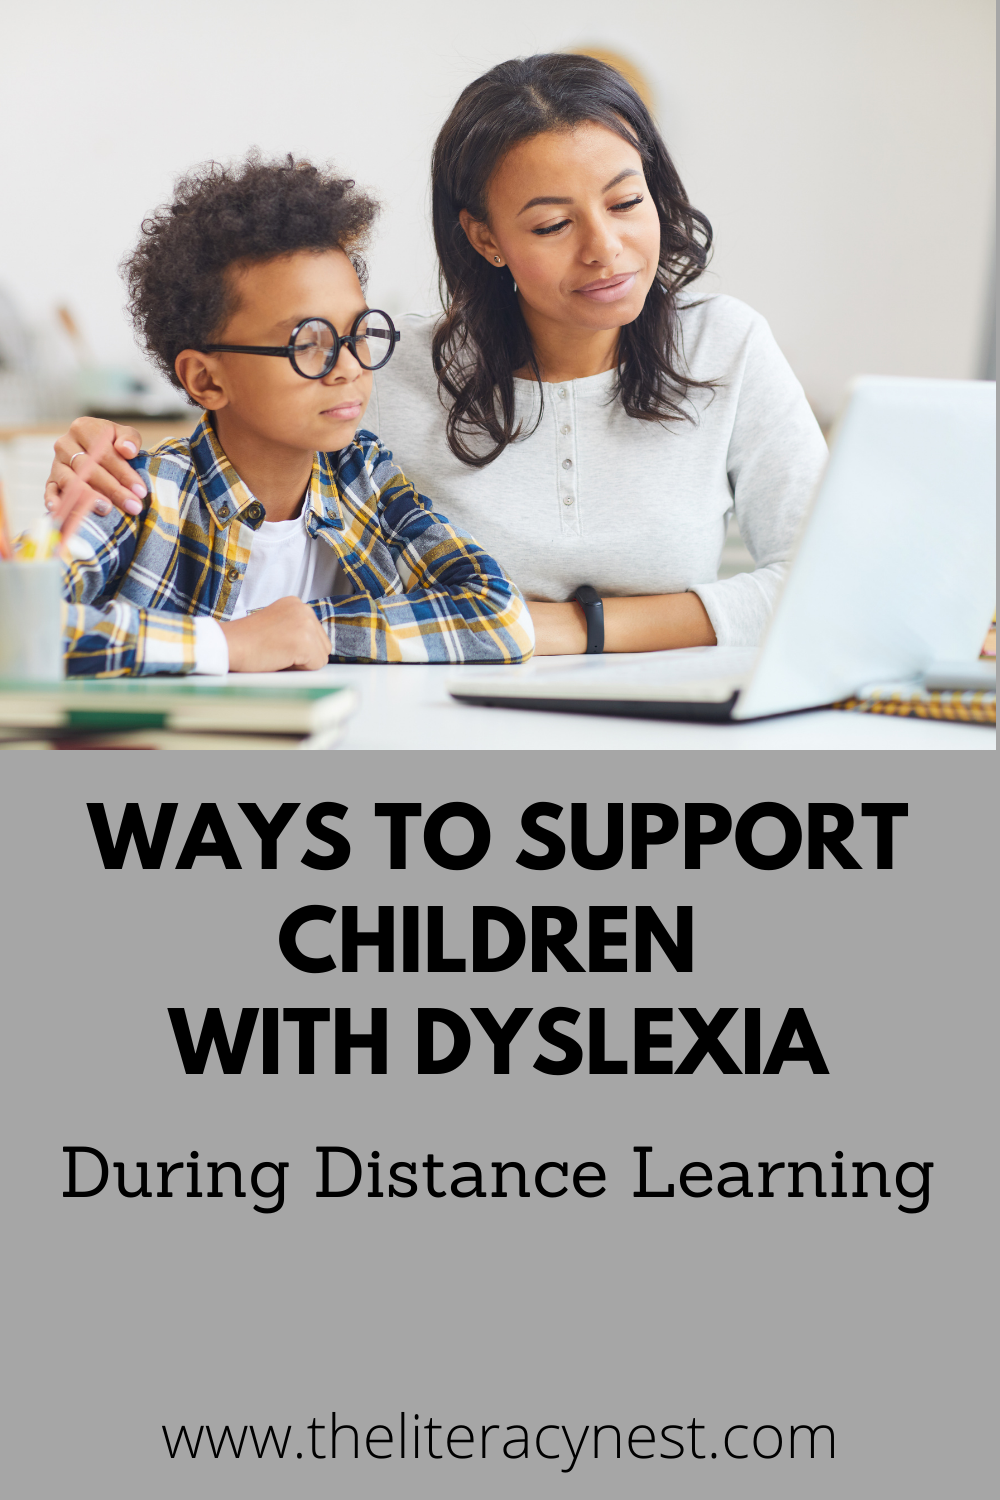 Ways to support children with dyslexia during distance learning